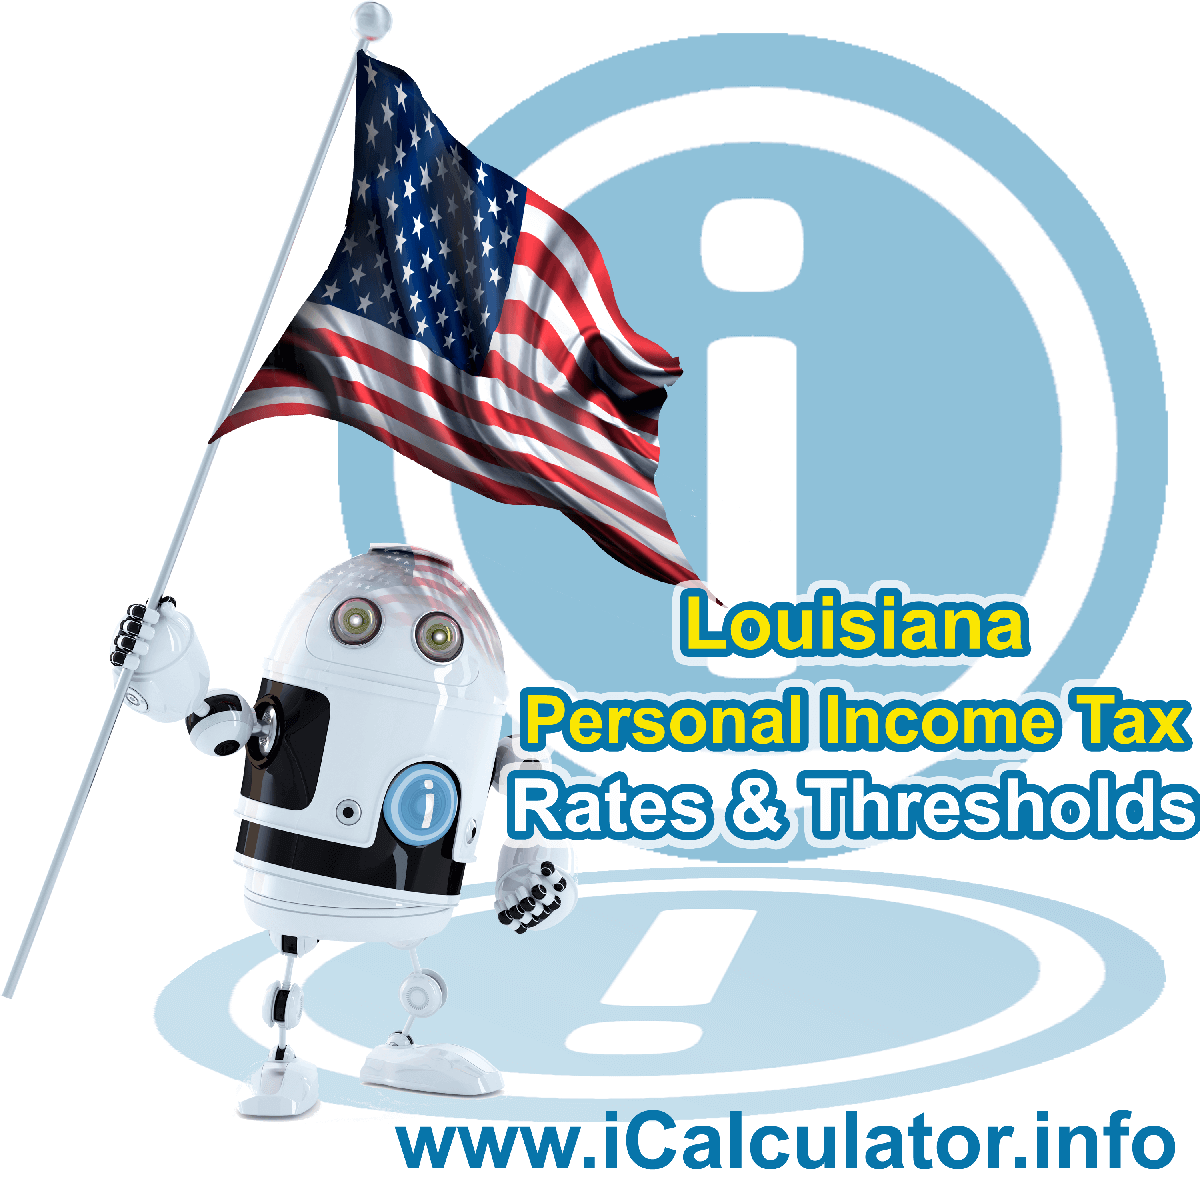 Louisiana State Tax Tables 2020. This image displays details of the Louisiana State Tax Tables for the 2020 tax return year which is provided in support of the 2020 US Tax Calculator